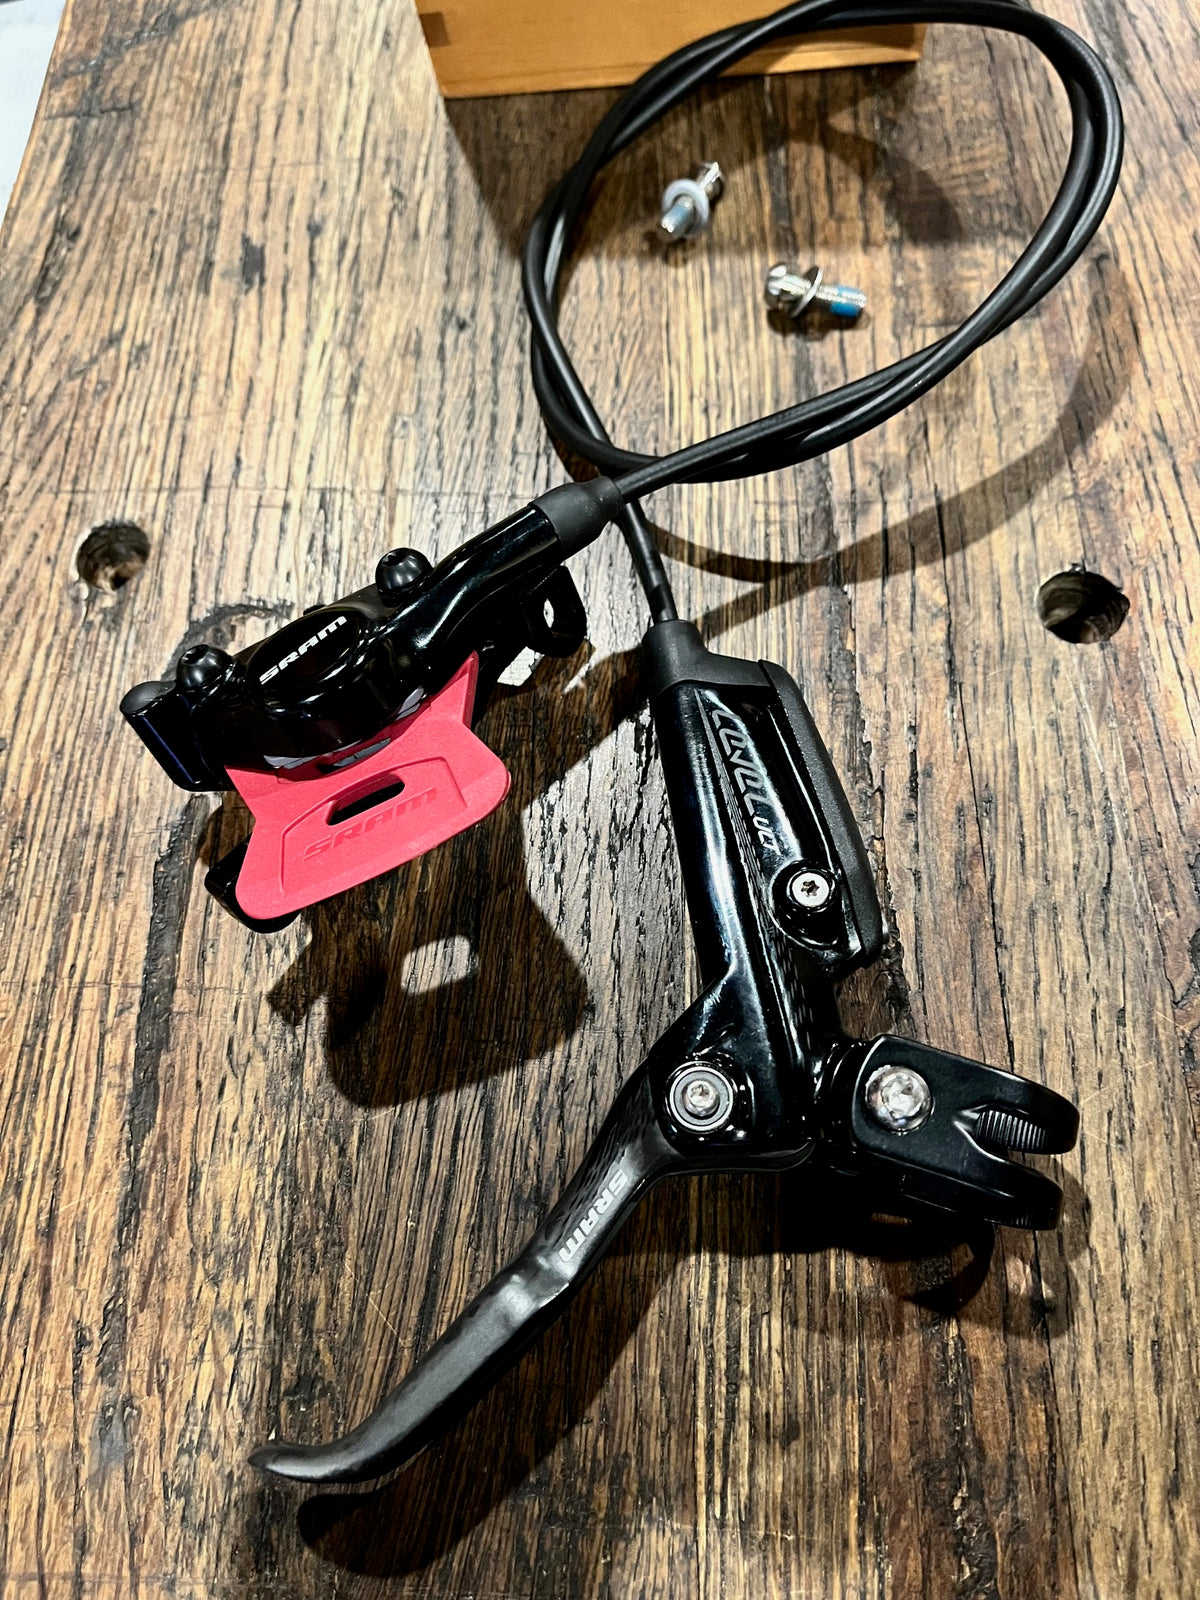 SRAM Level Ultimate Disc Brake Lever and Caliper - Front - Take off